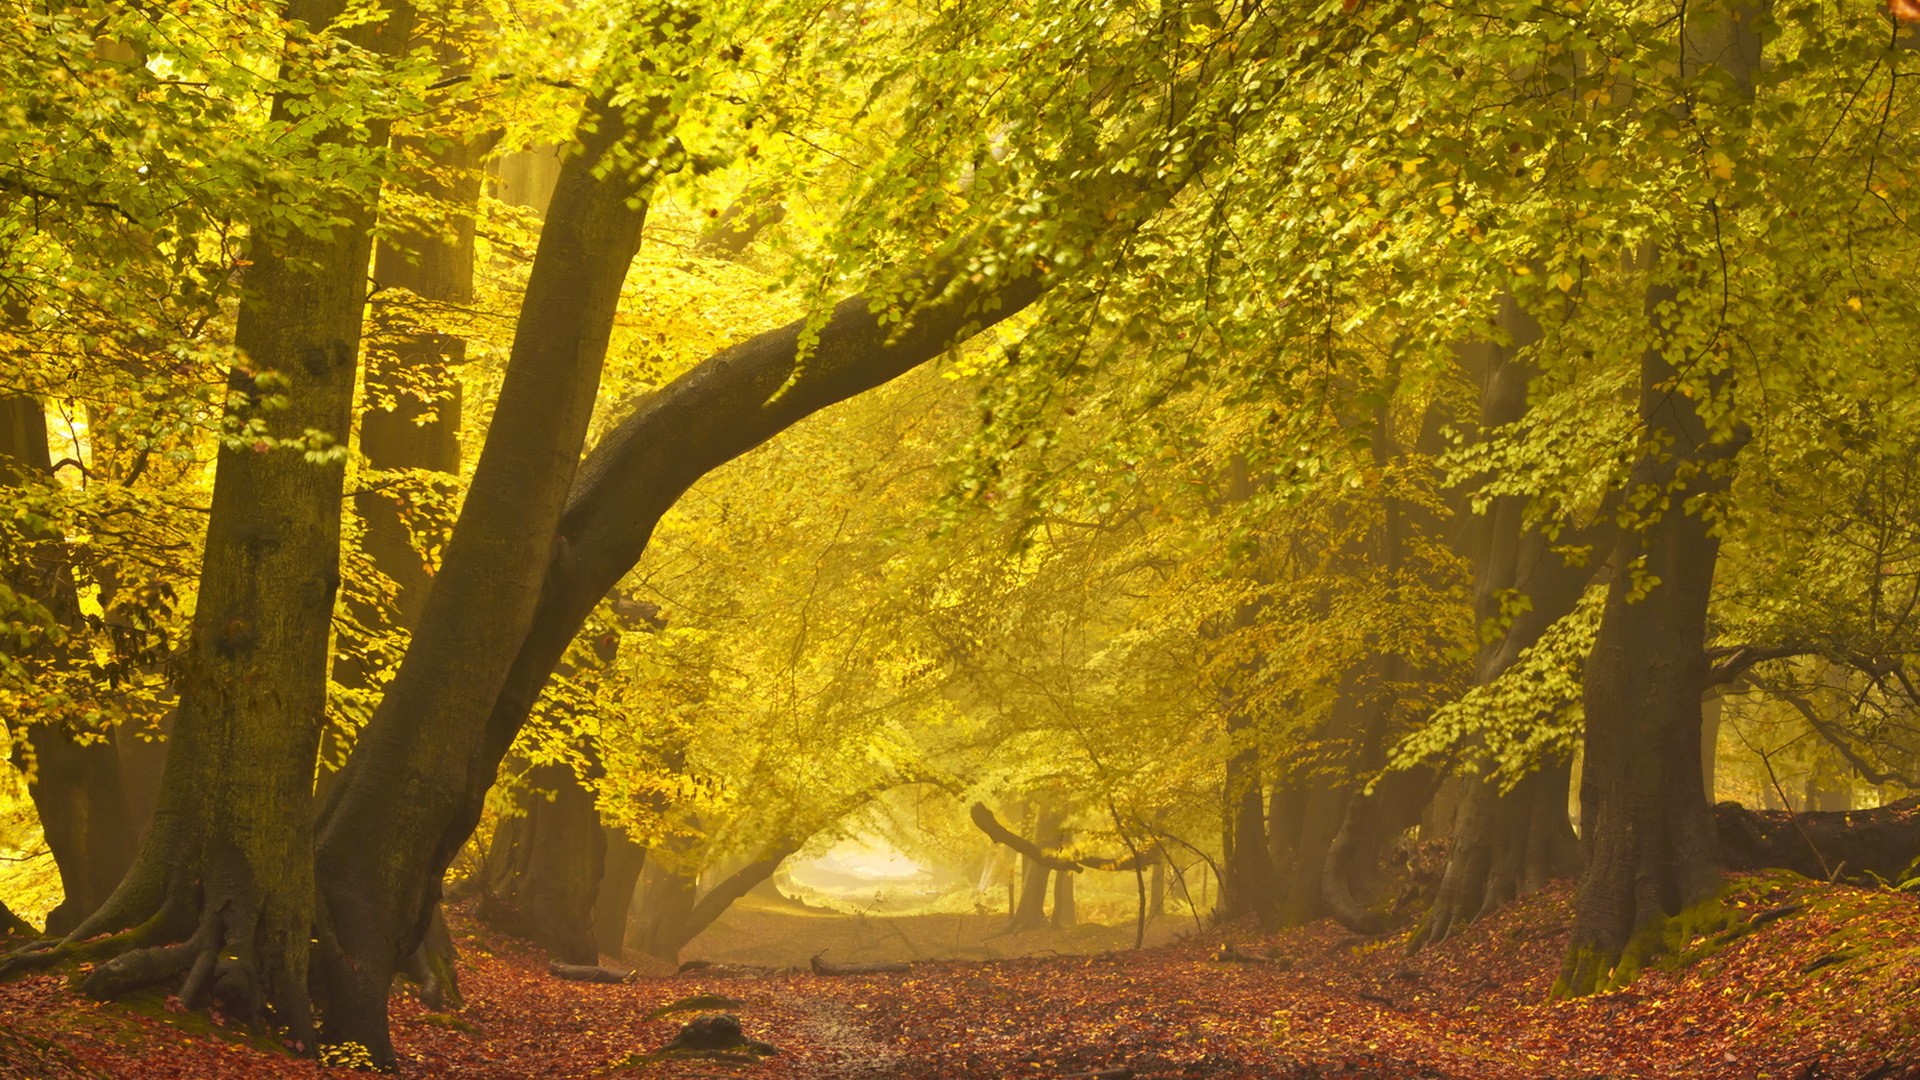 General 1920x1080 plants trees path forest fall yellow